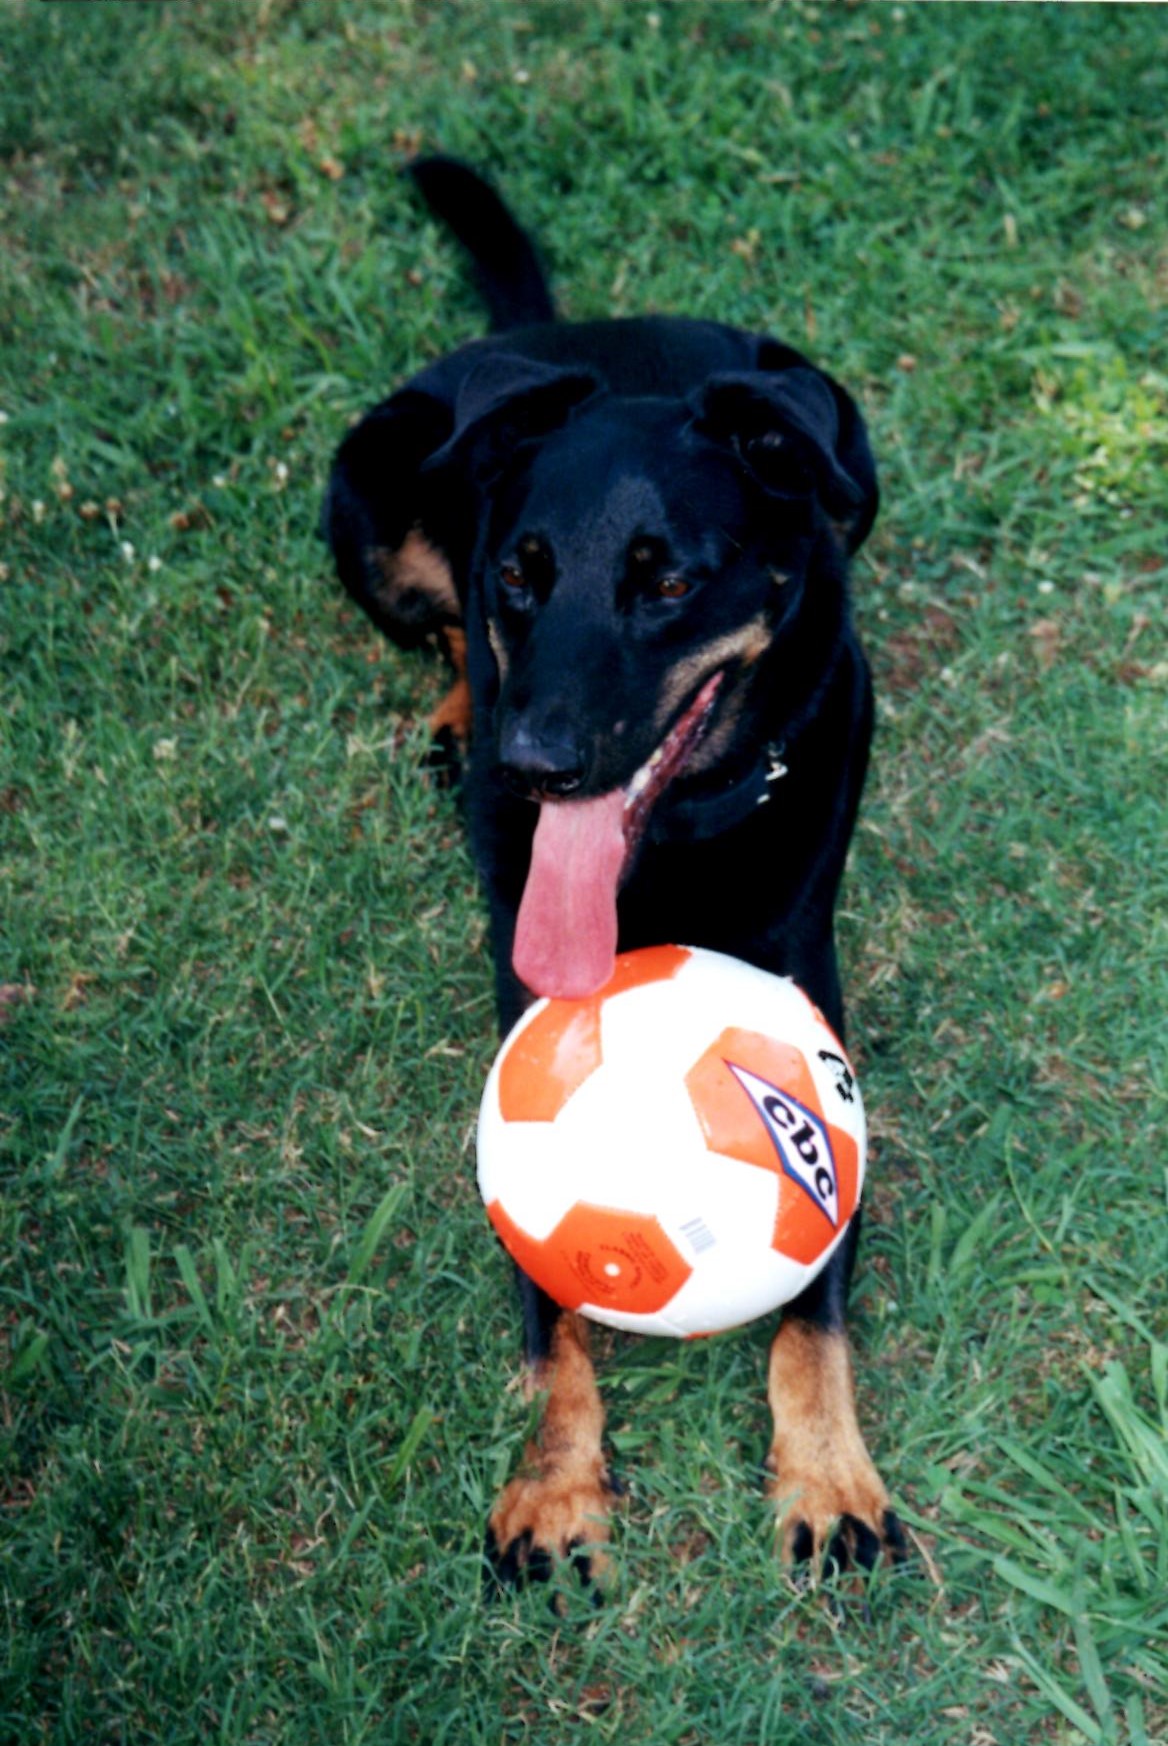 Full sized soccer balls were a favorite toy.